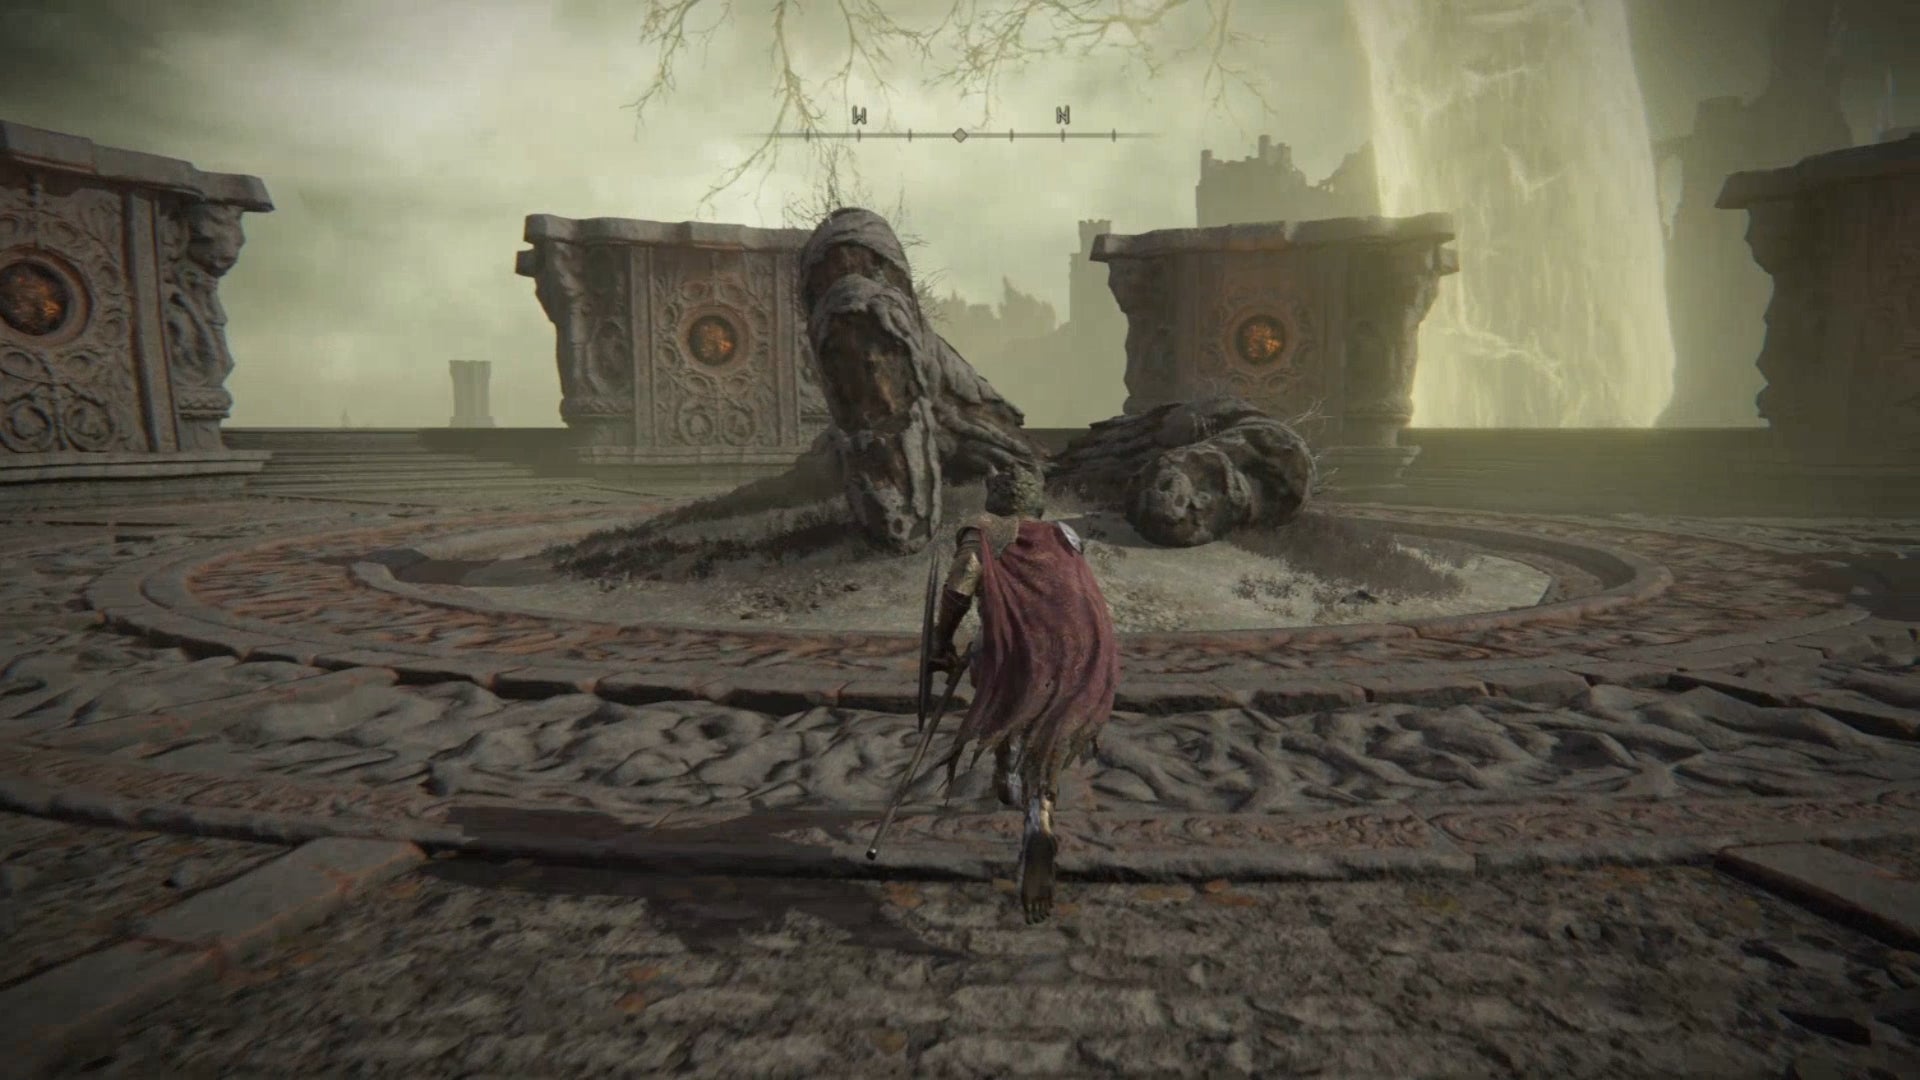 Elden Ring: the player stands on the summit of the Divine Tower of Caelid, looking at the point between the Two Fingers where General Radahn's Great Rune can be activated.